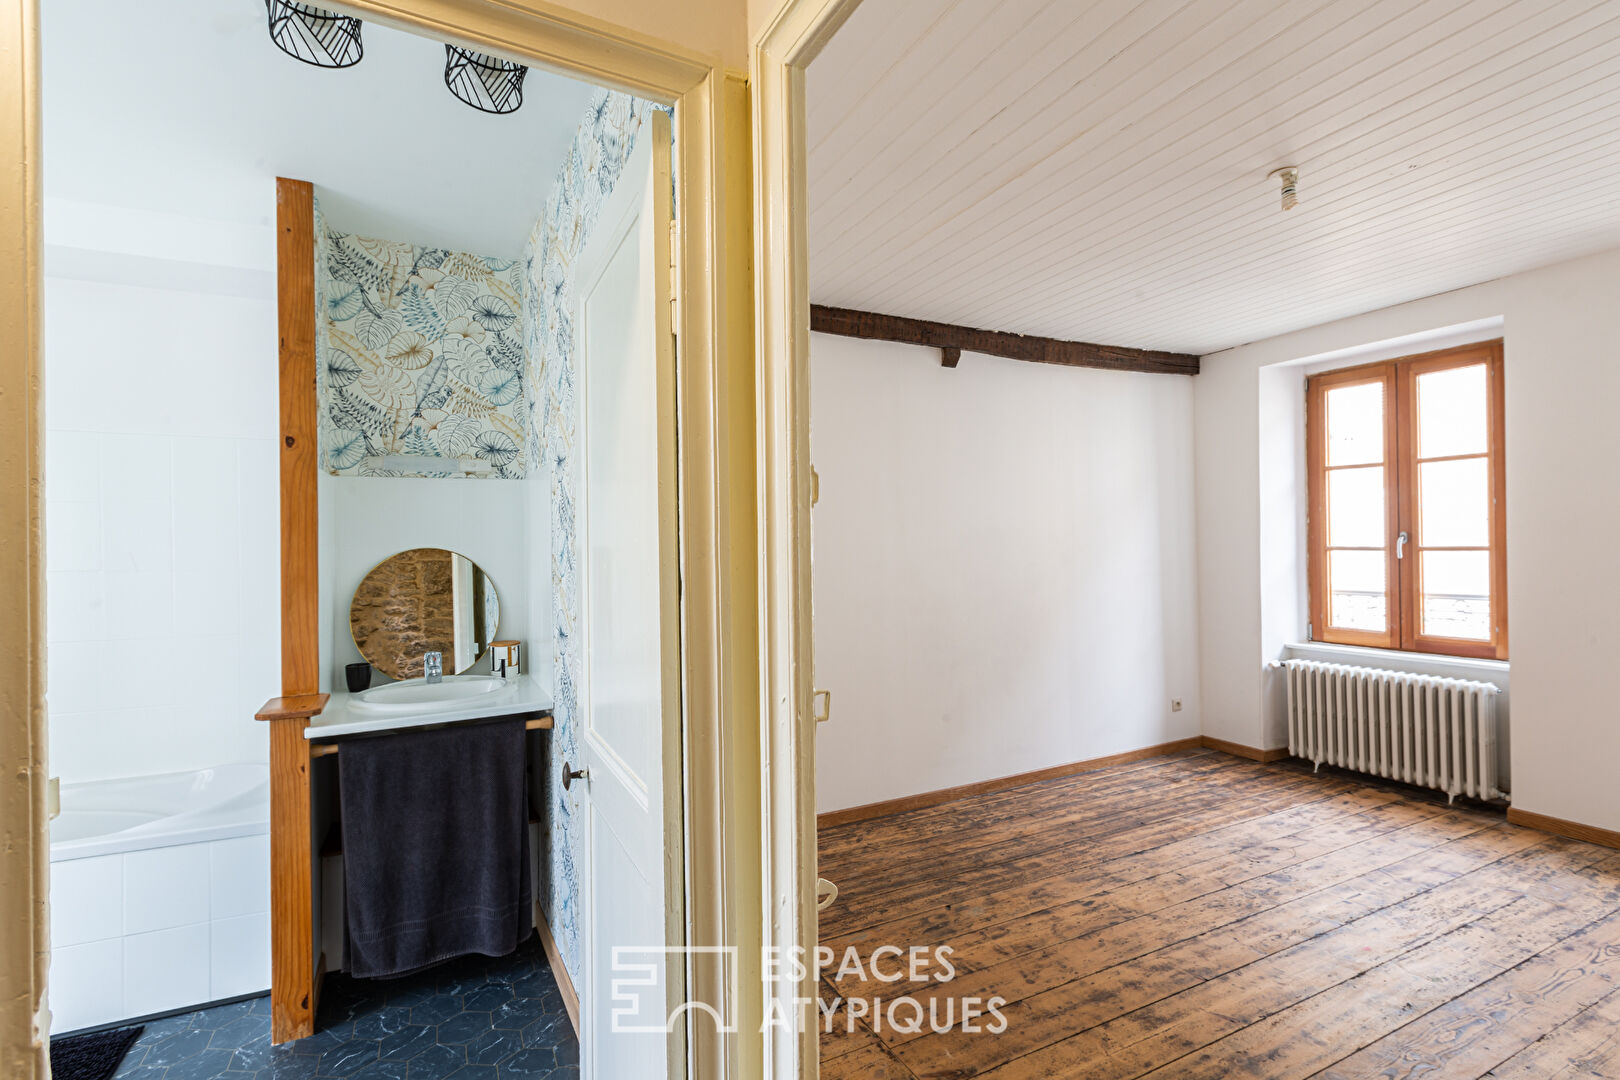 Listed village house, in stone, renovated 5 rooms 80 m2